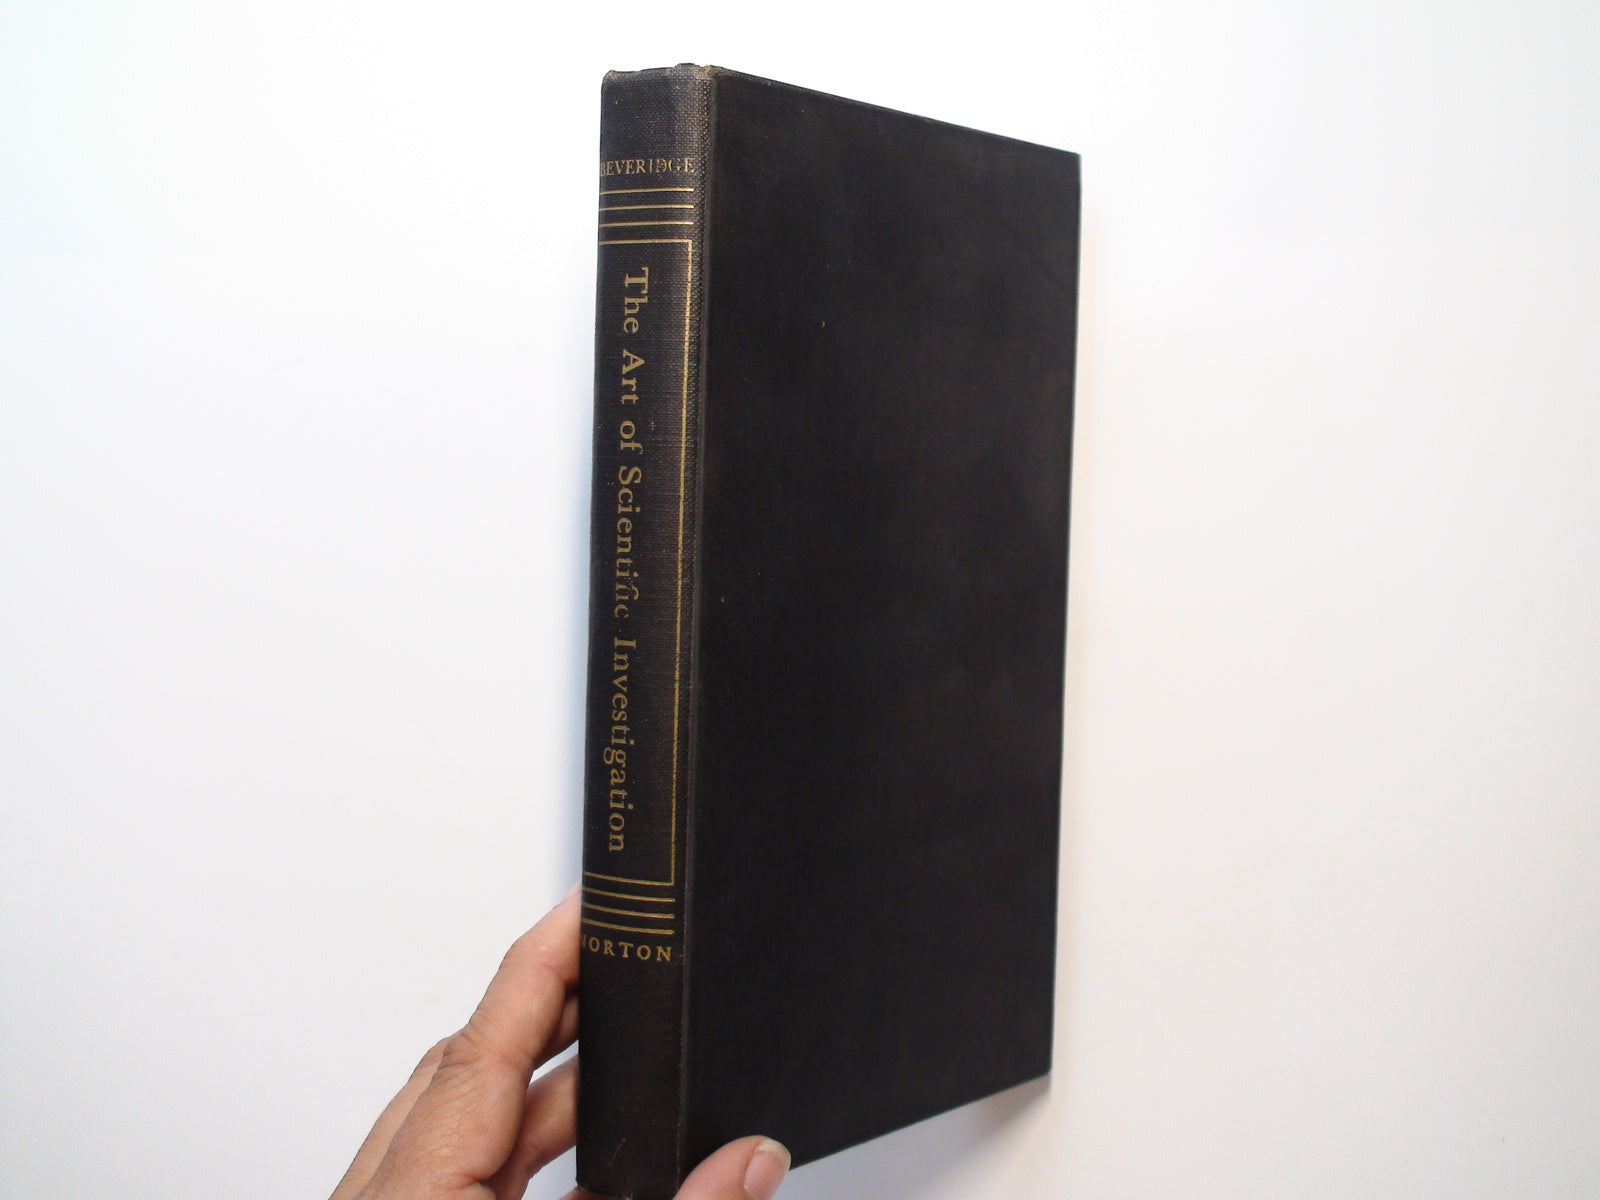 The Art of Scientific Investigation, by W. I. B. Beveridge, Illustrated, 1951